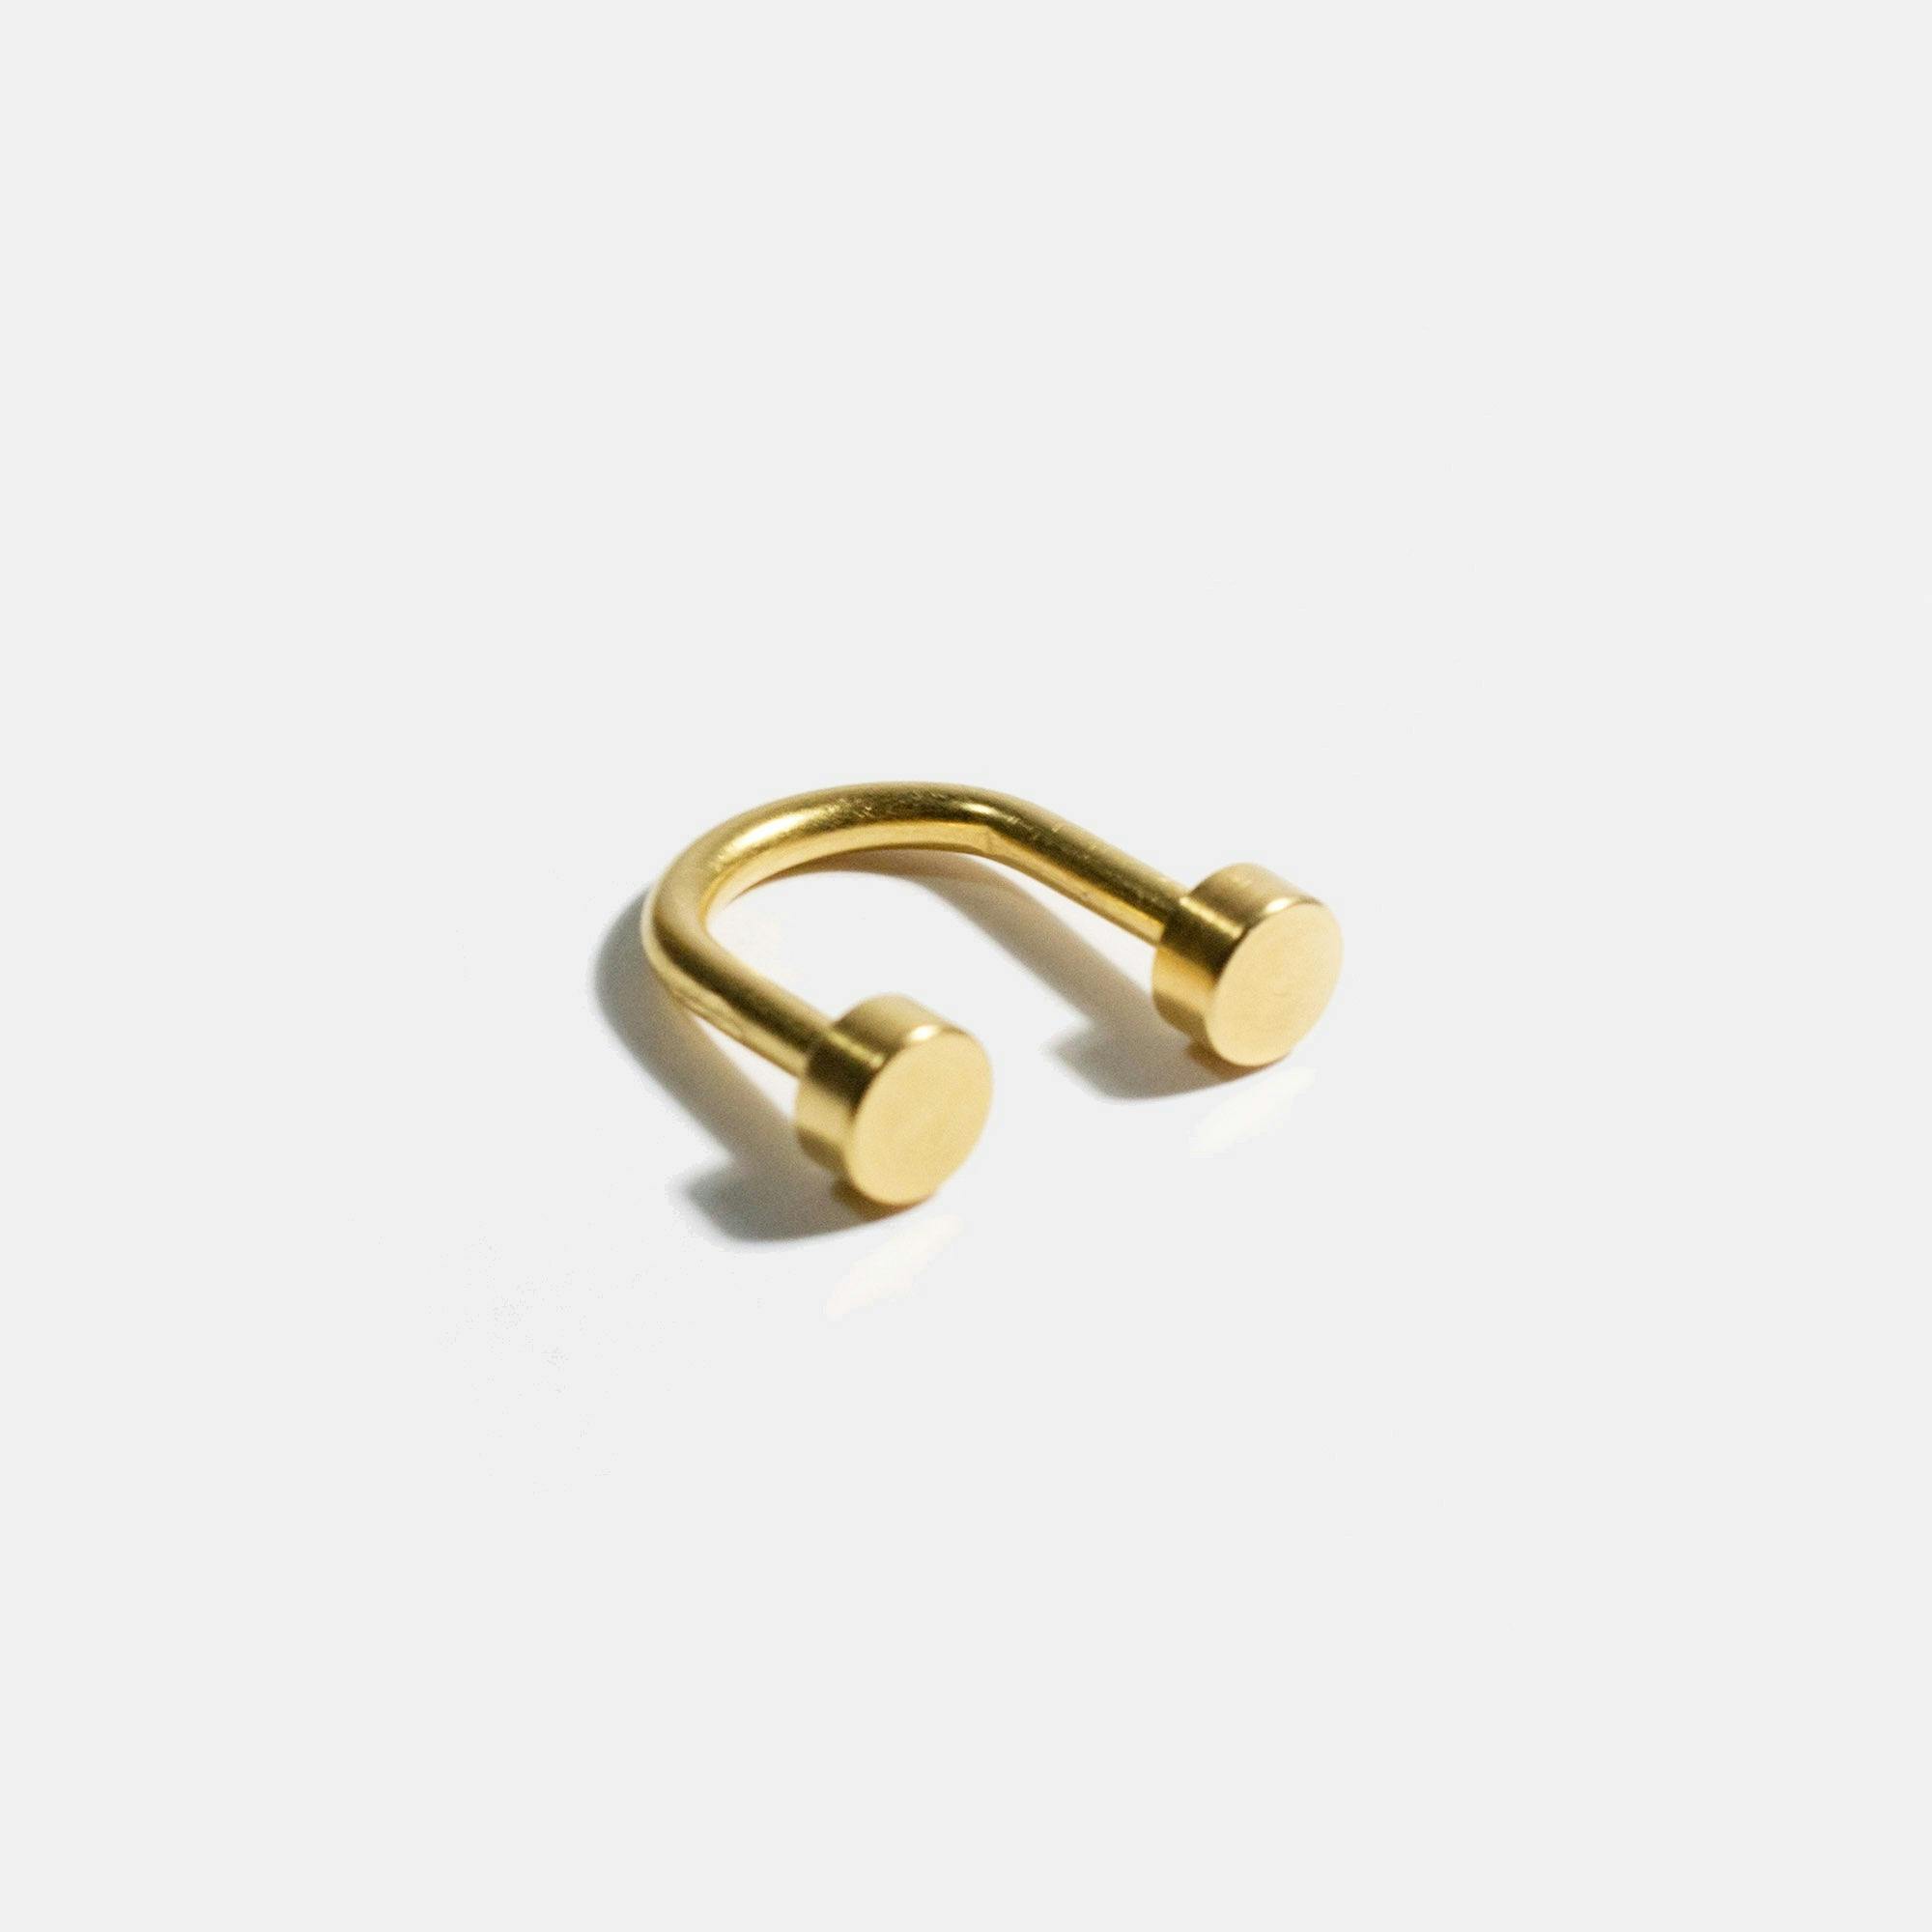 Ode Ring, a product by NO NA MÉ